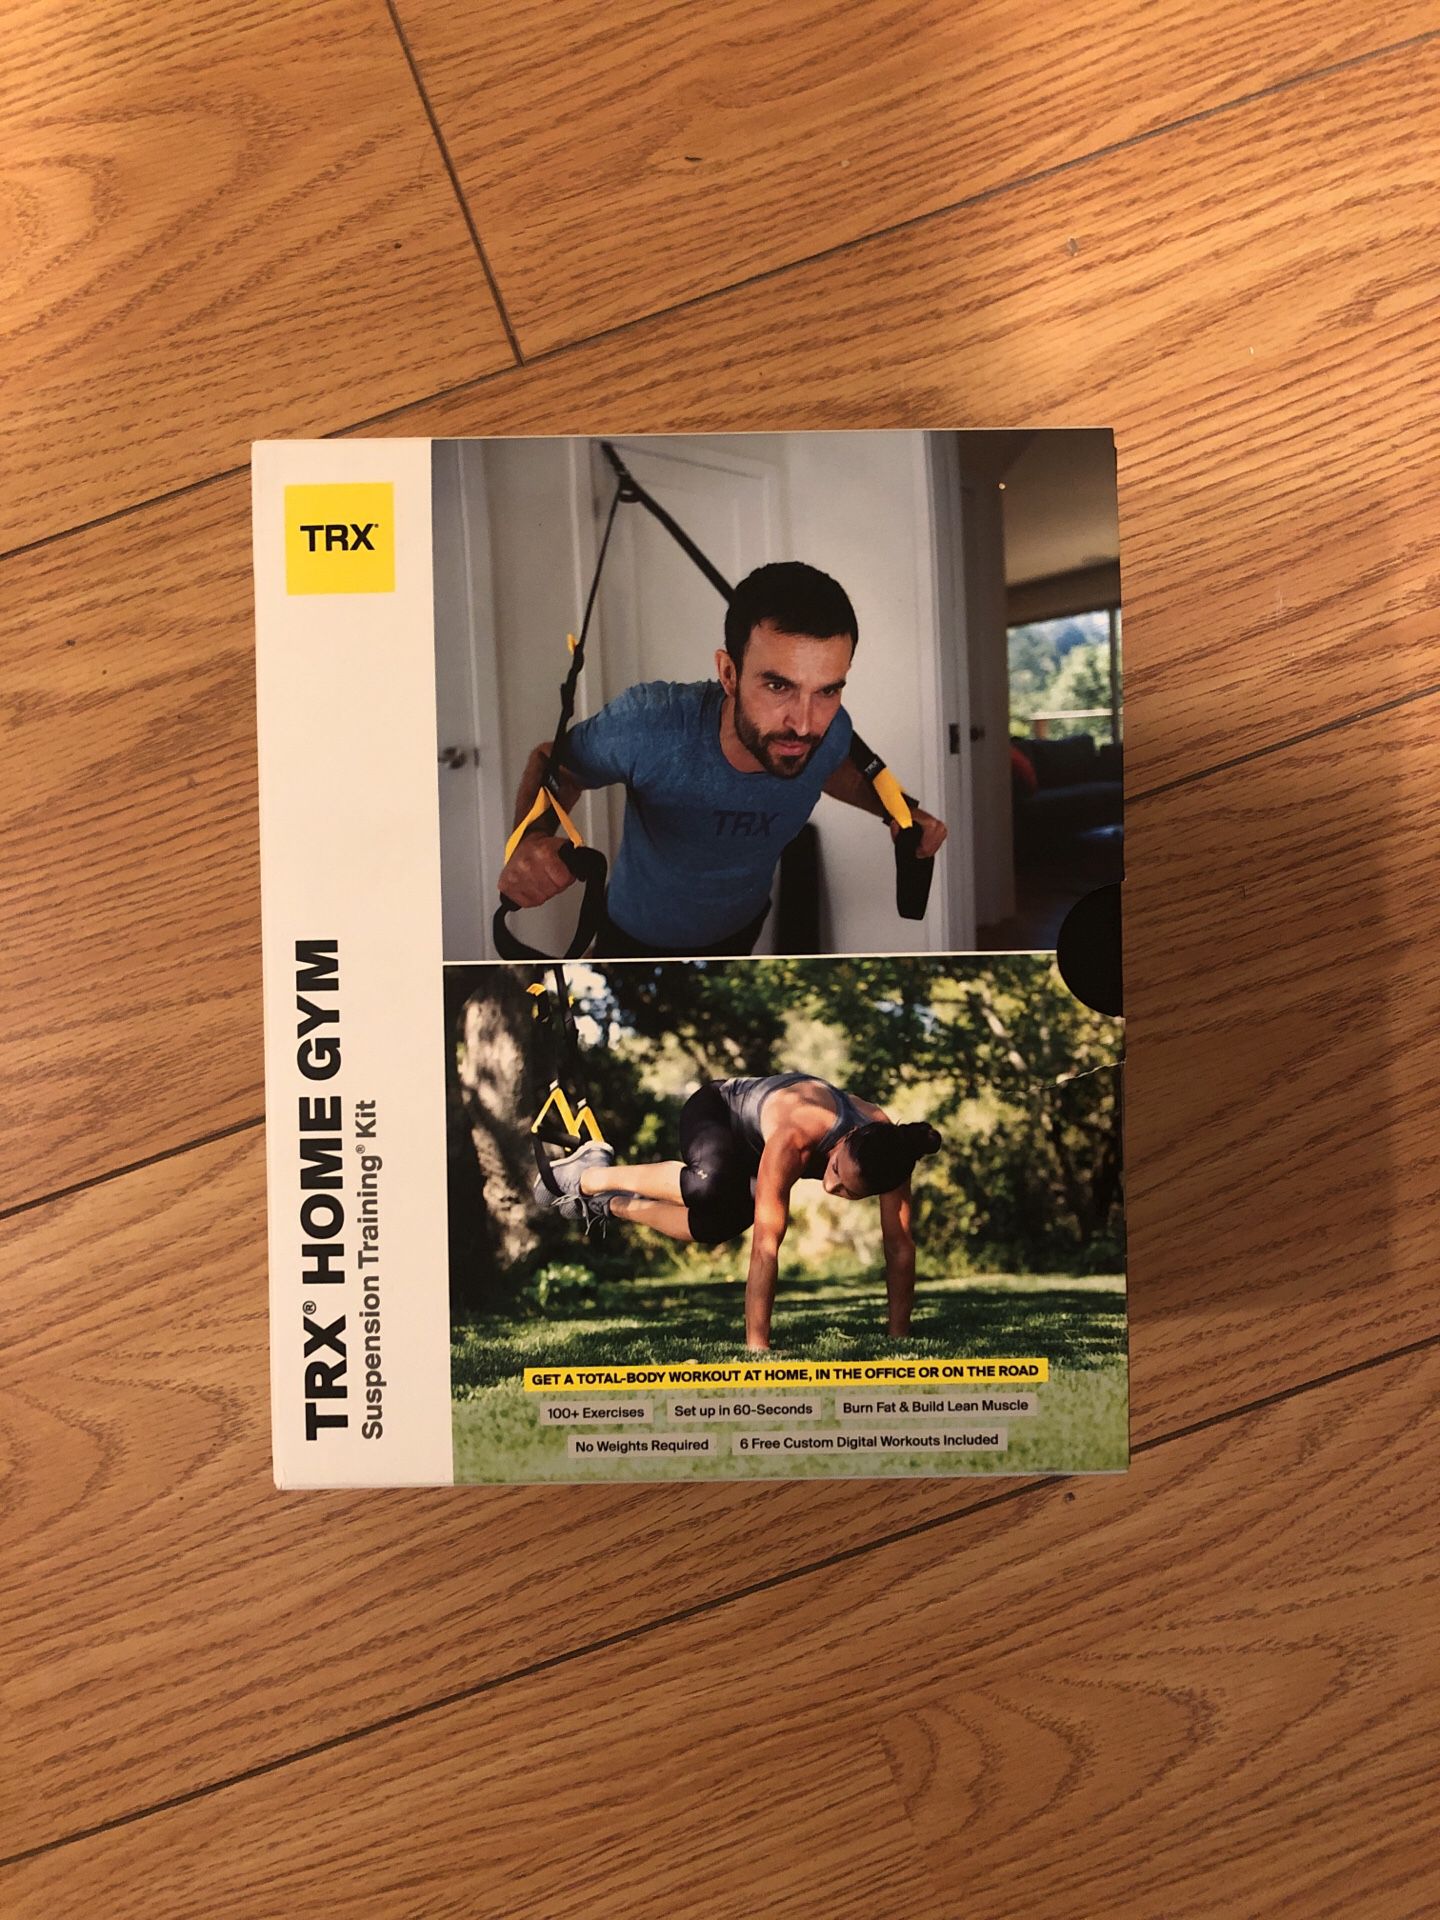 TRX HOME GYM - Brand new in box!